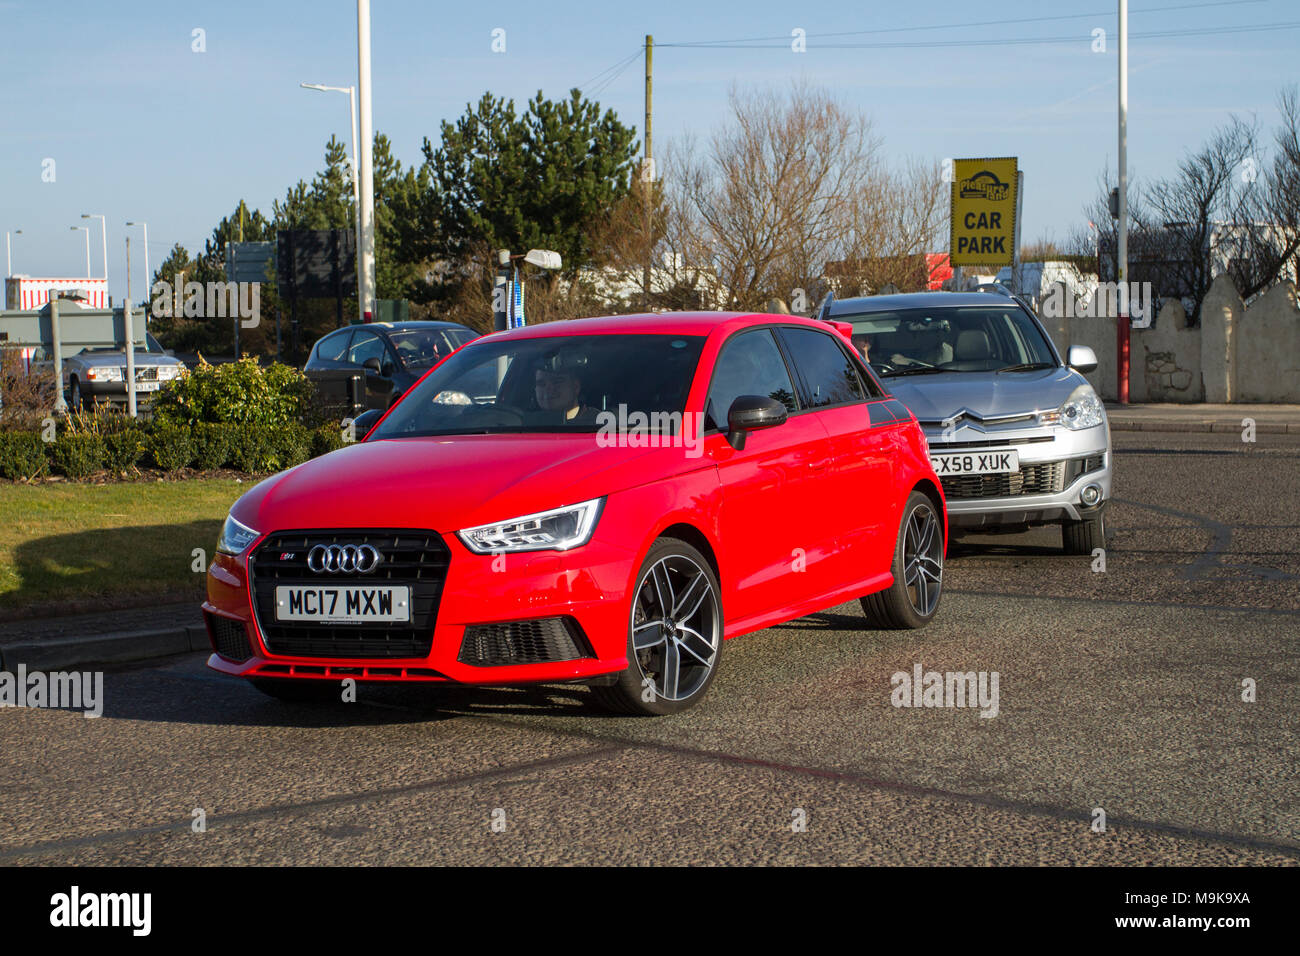 2017 red Audi S1 Competition Quattro; North-West Supercar event as cars arrive in the coastal resort of Southport. SuperCars are bumper to bumper on the seafront esplanade as modern classics, sports cars & vintage car enthusiasts enjoy a motoring day out. Stock Photo